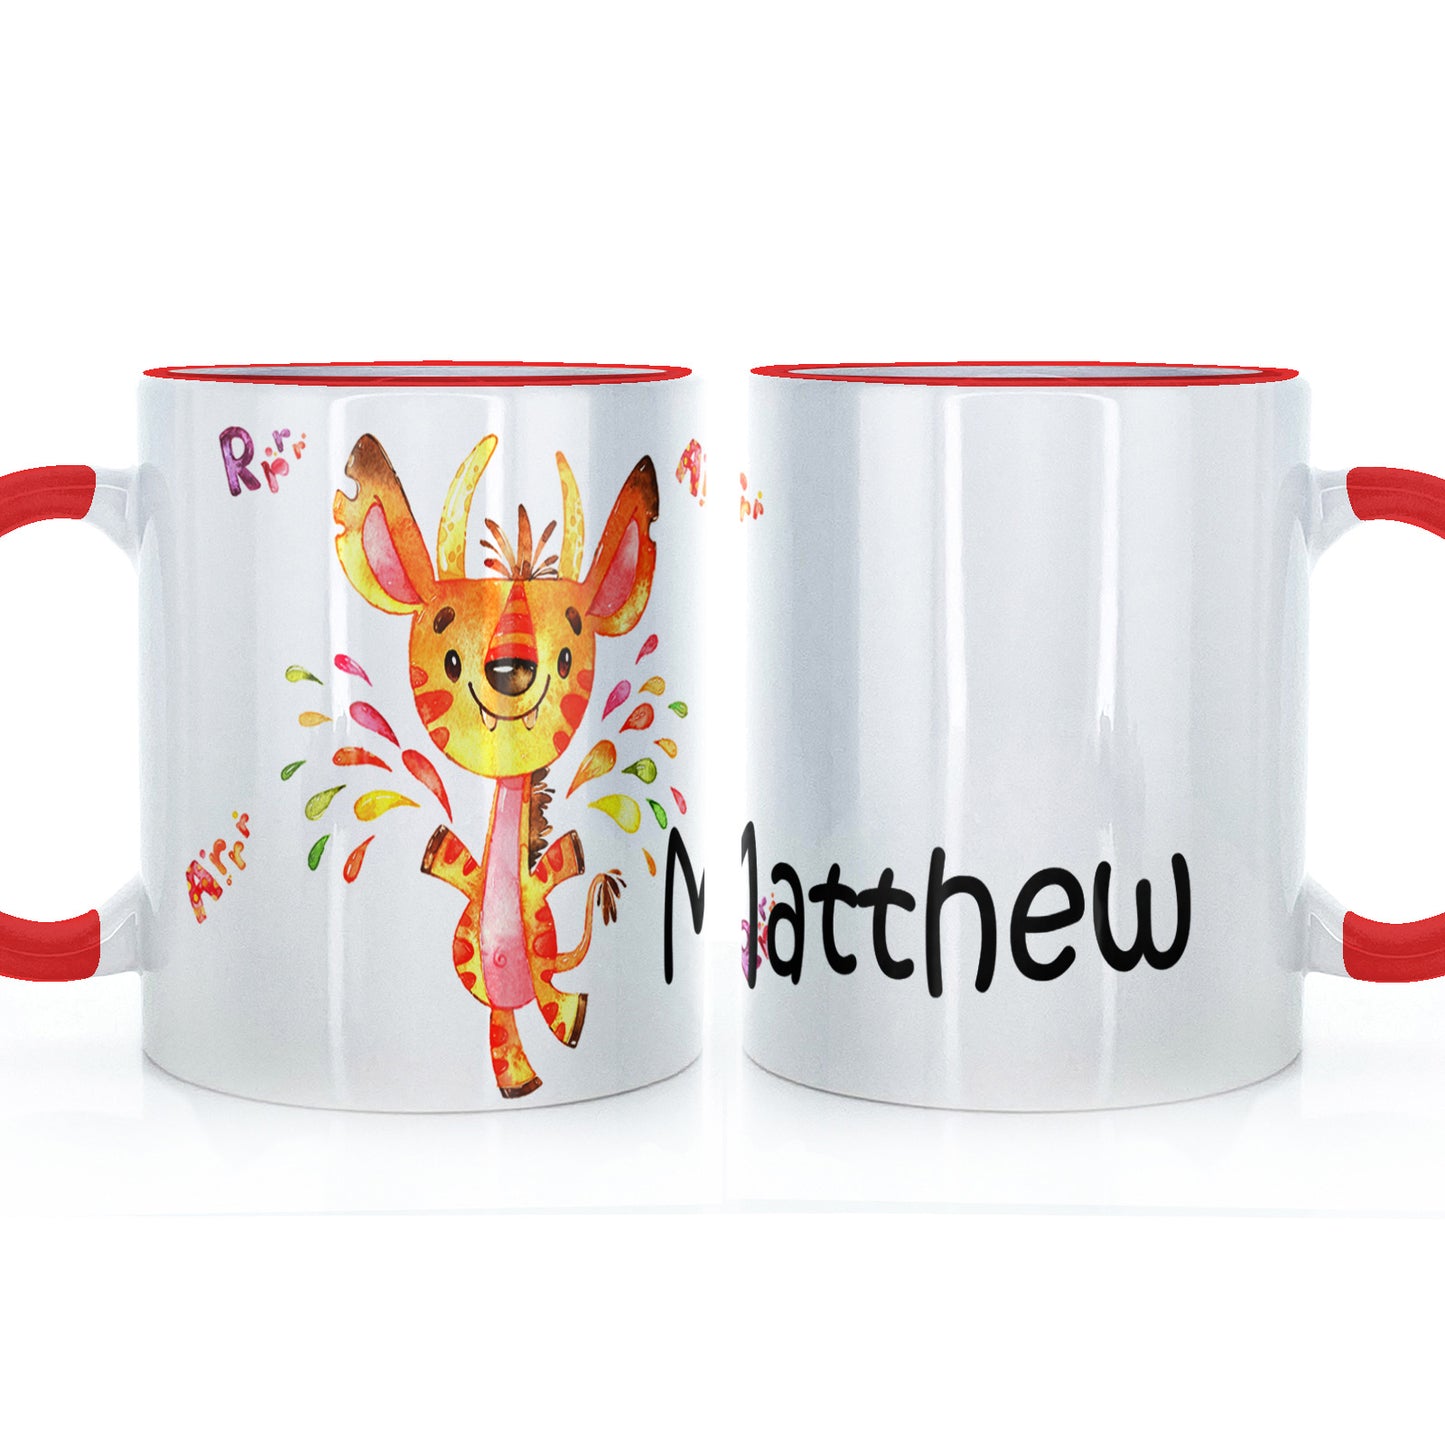 Personalised Mug with Childish Text and Horned Growling Orange Splatter Monster